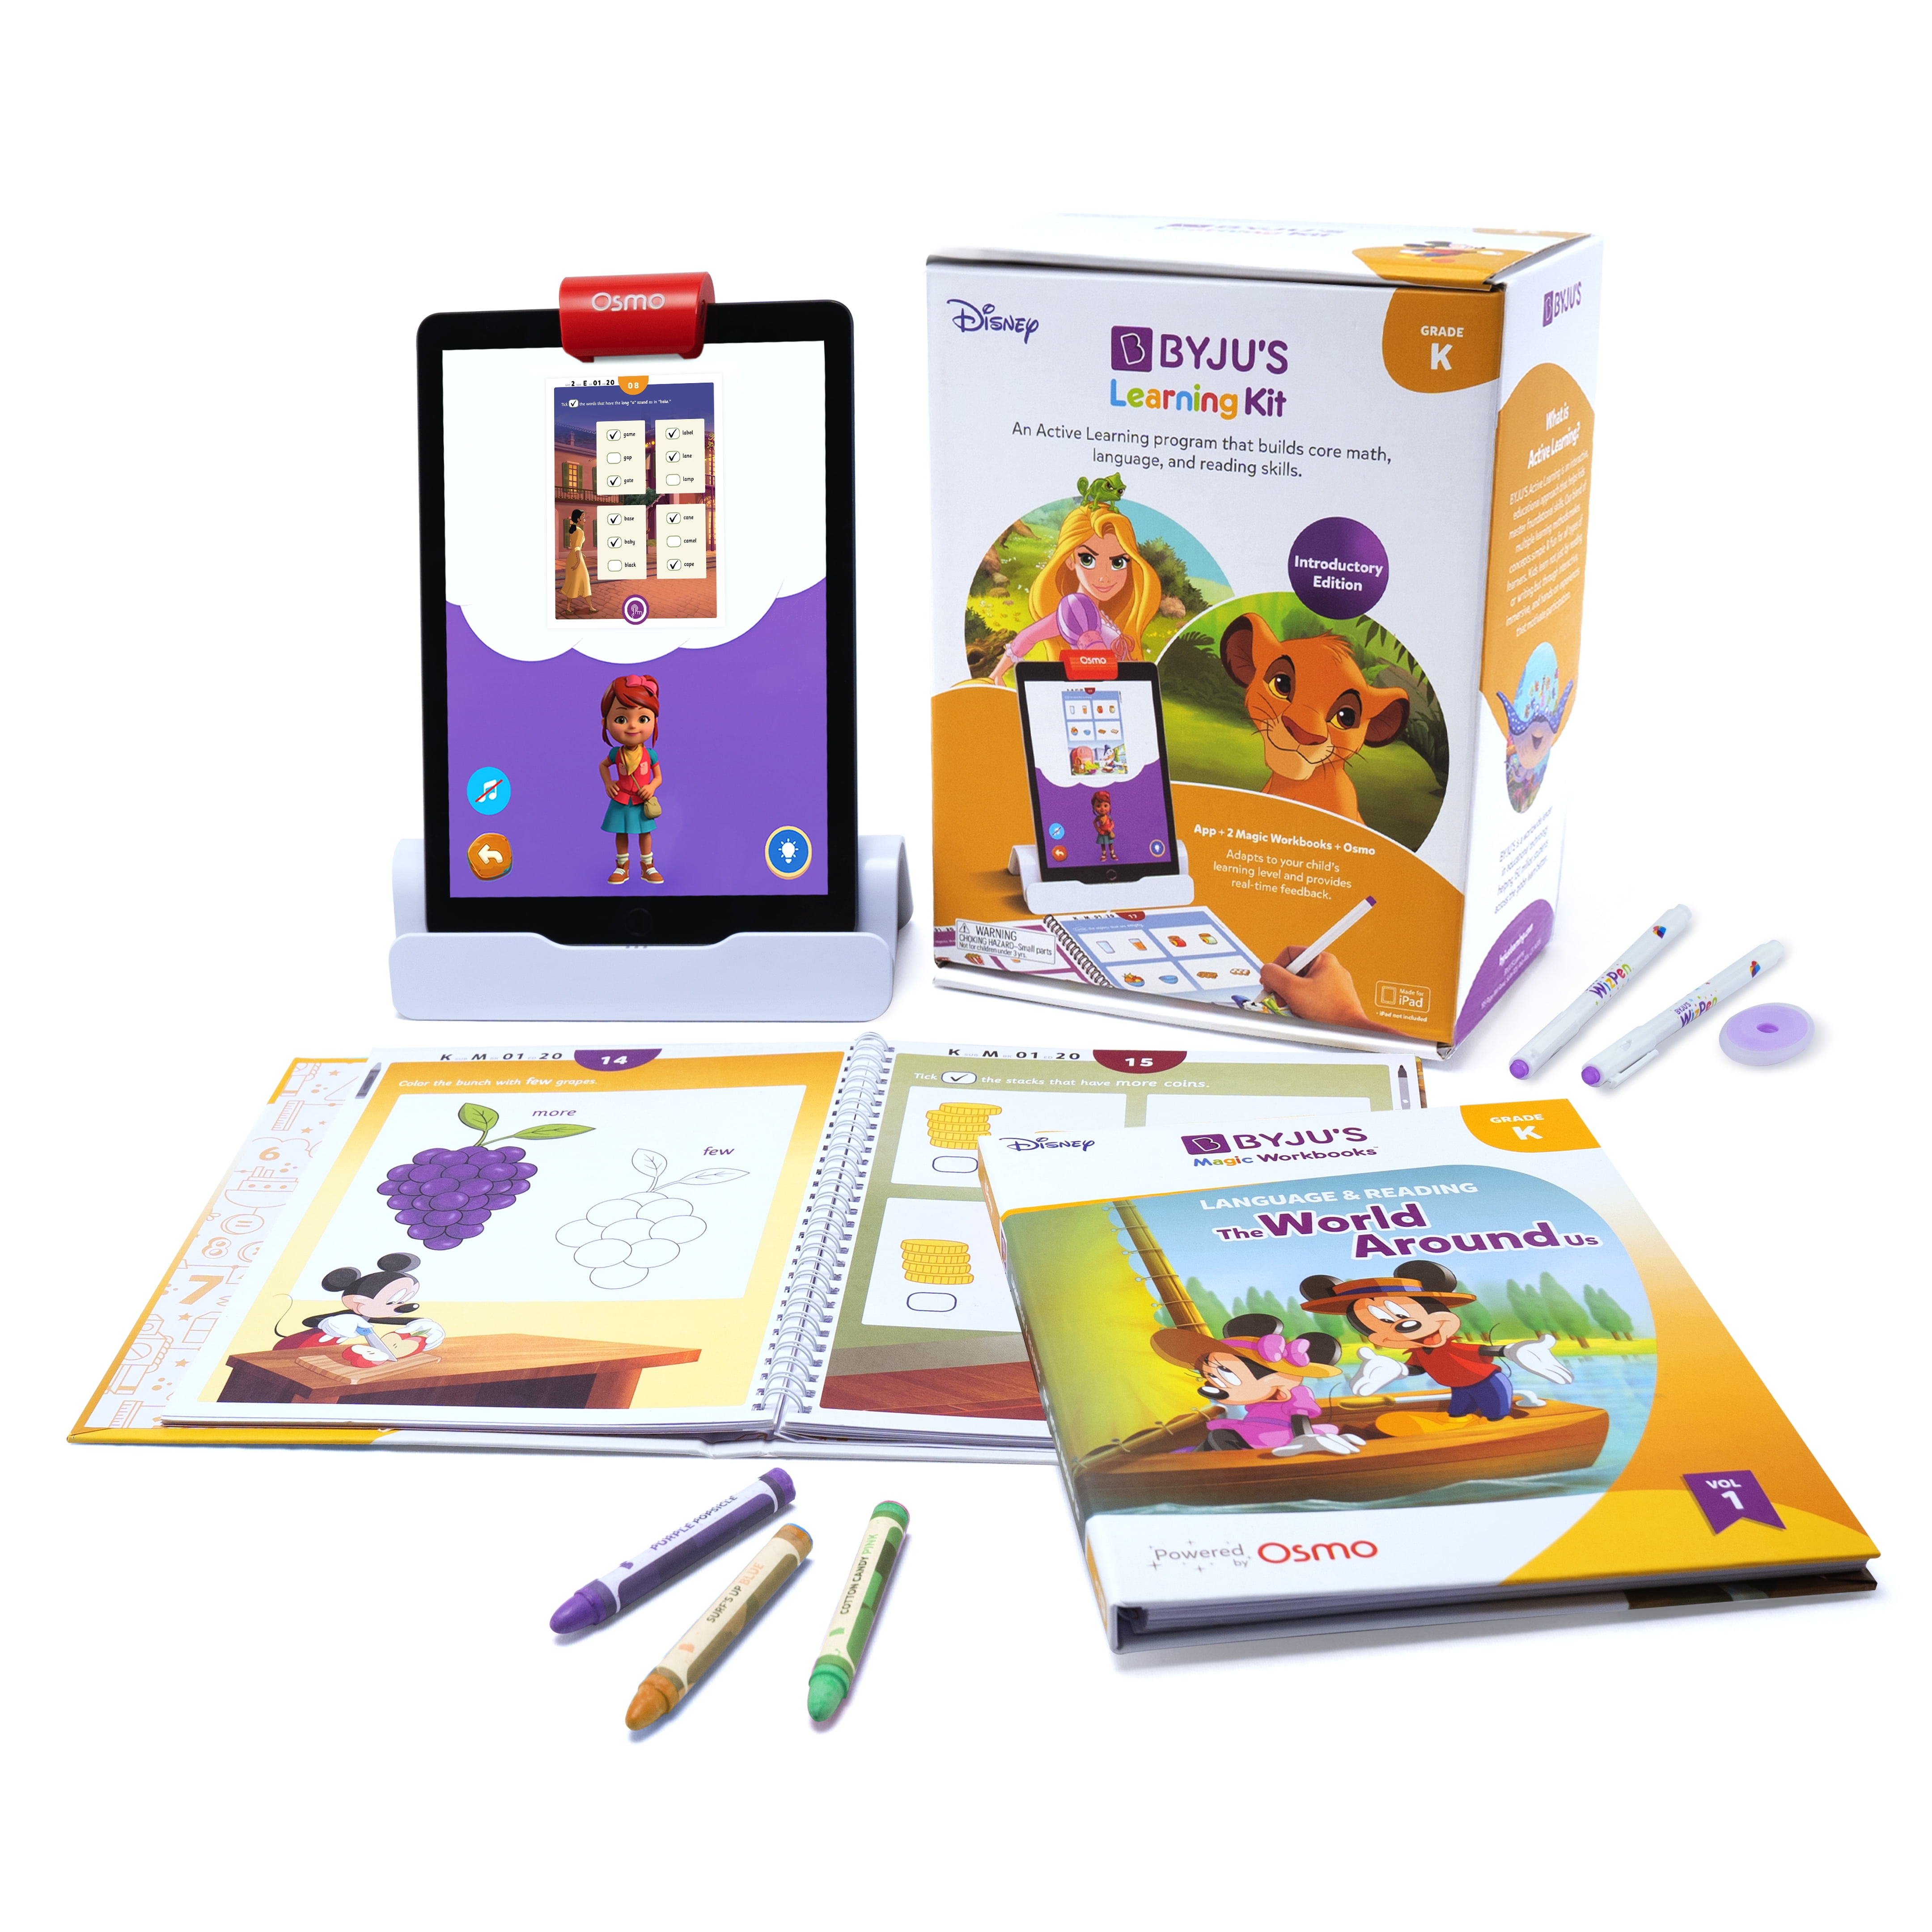 BYJUS Learning Kit: Disney, Grade K, Introductory Edition, Kindergarten Workbooks Age 5-6, Math Games, Puzzles, Phonics, Sight Words, Learning Toys, Kindergarten Games, Reading Workbooks, STEM Toys